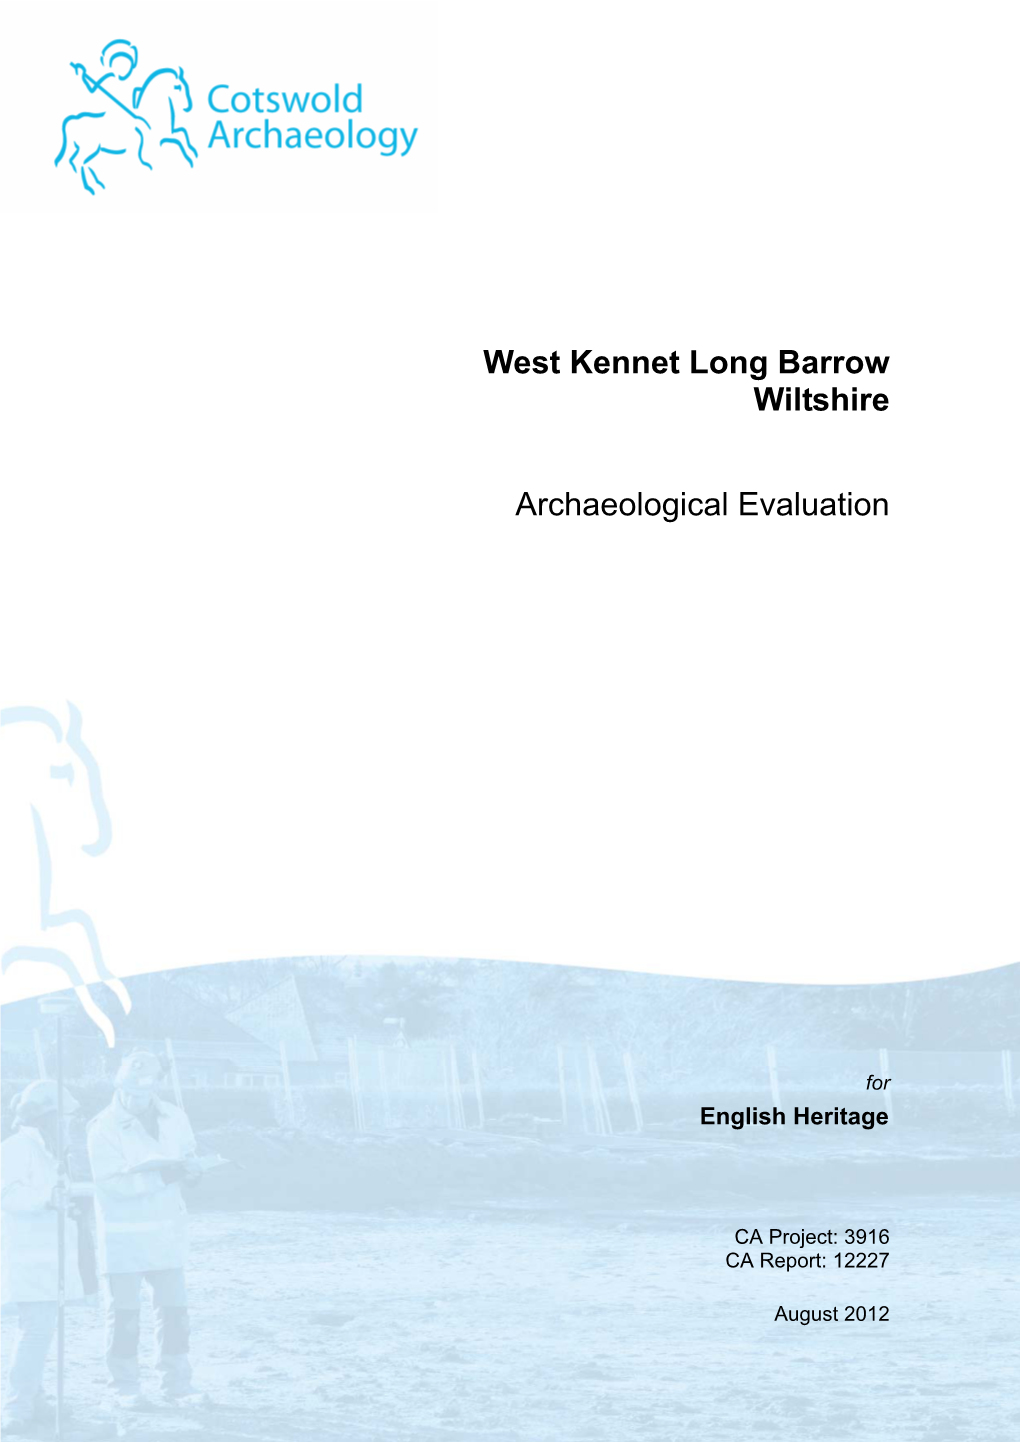 West Kennet Long Barrow Wiltshire Archaeological Evaluation